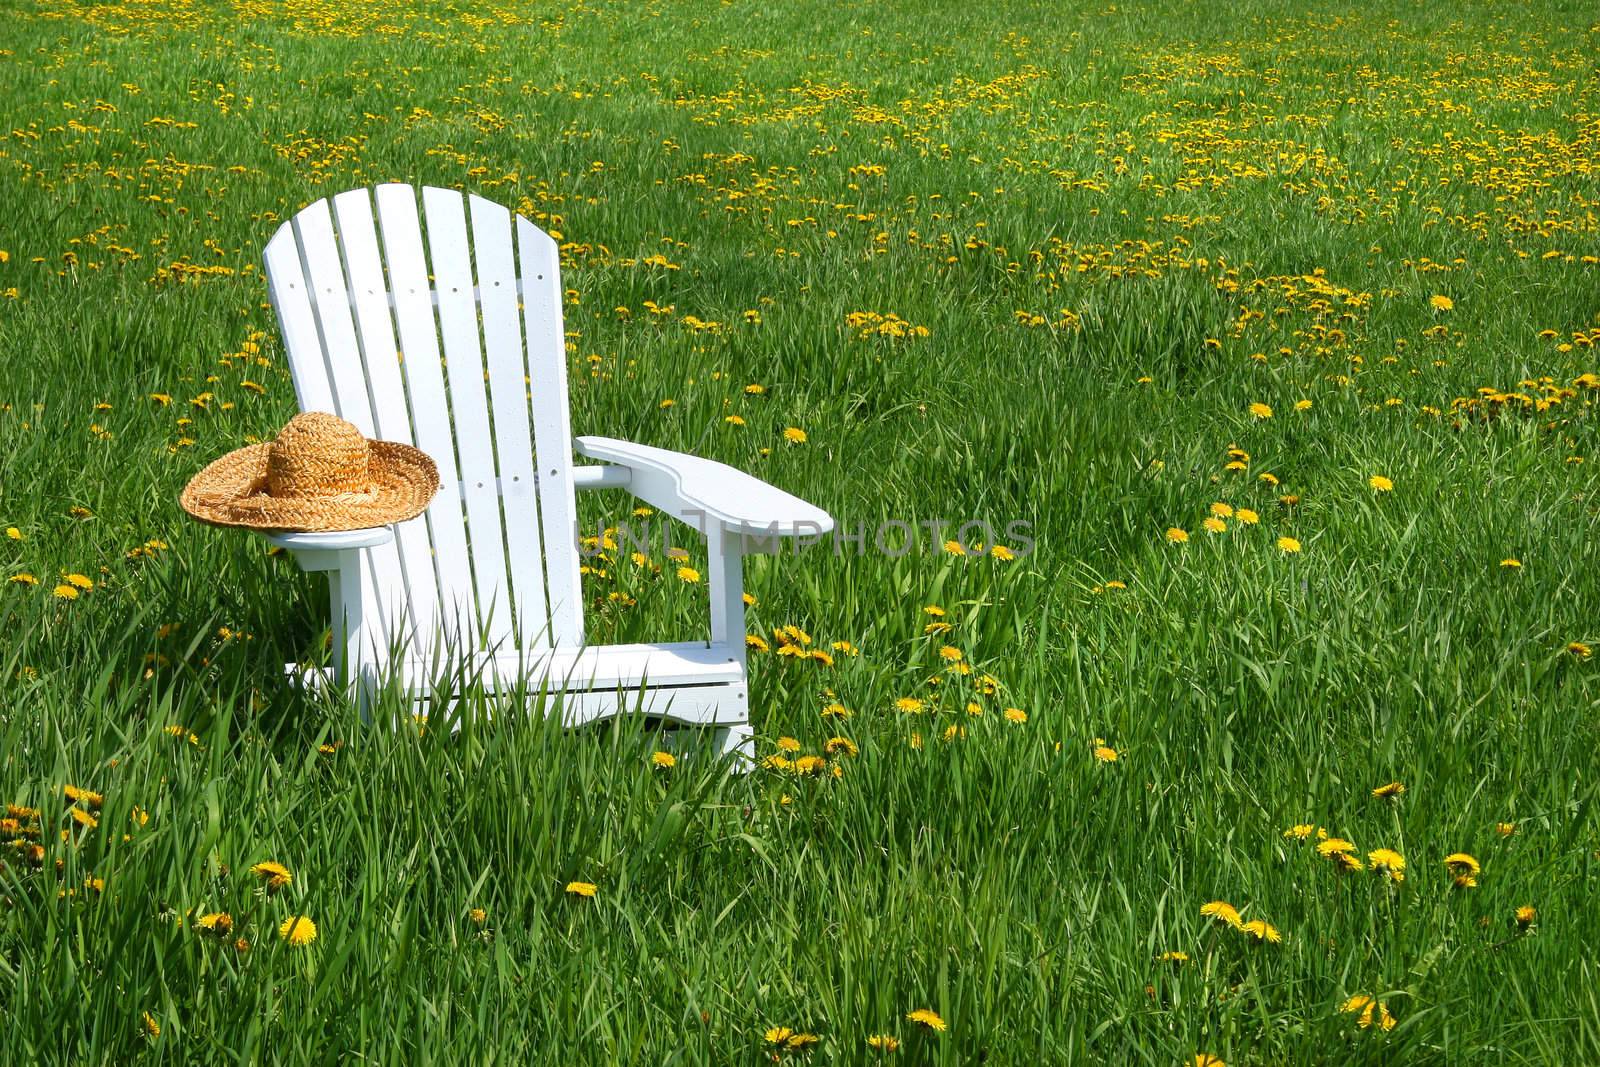 White chair with straw hat in a summer field of flowers